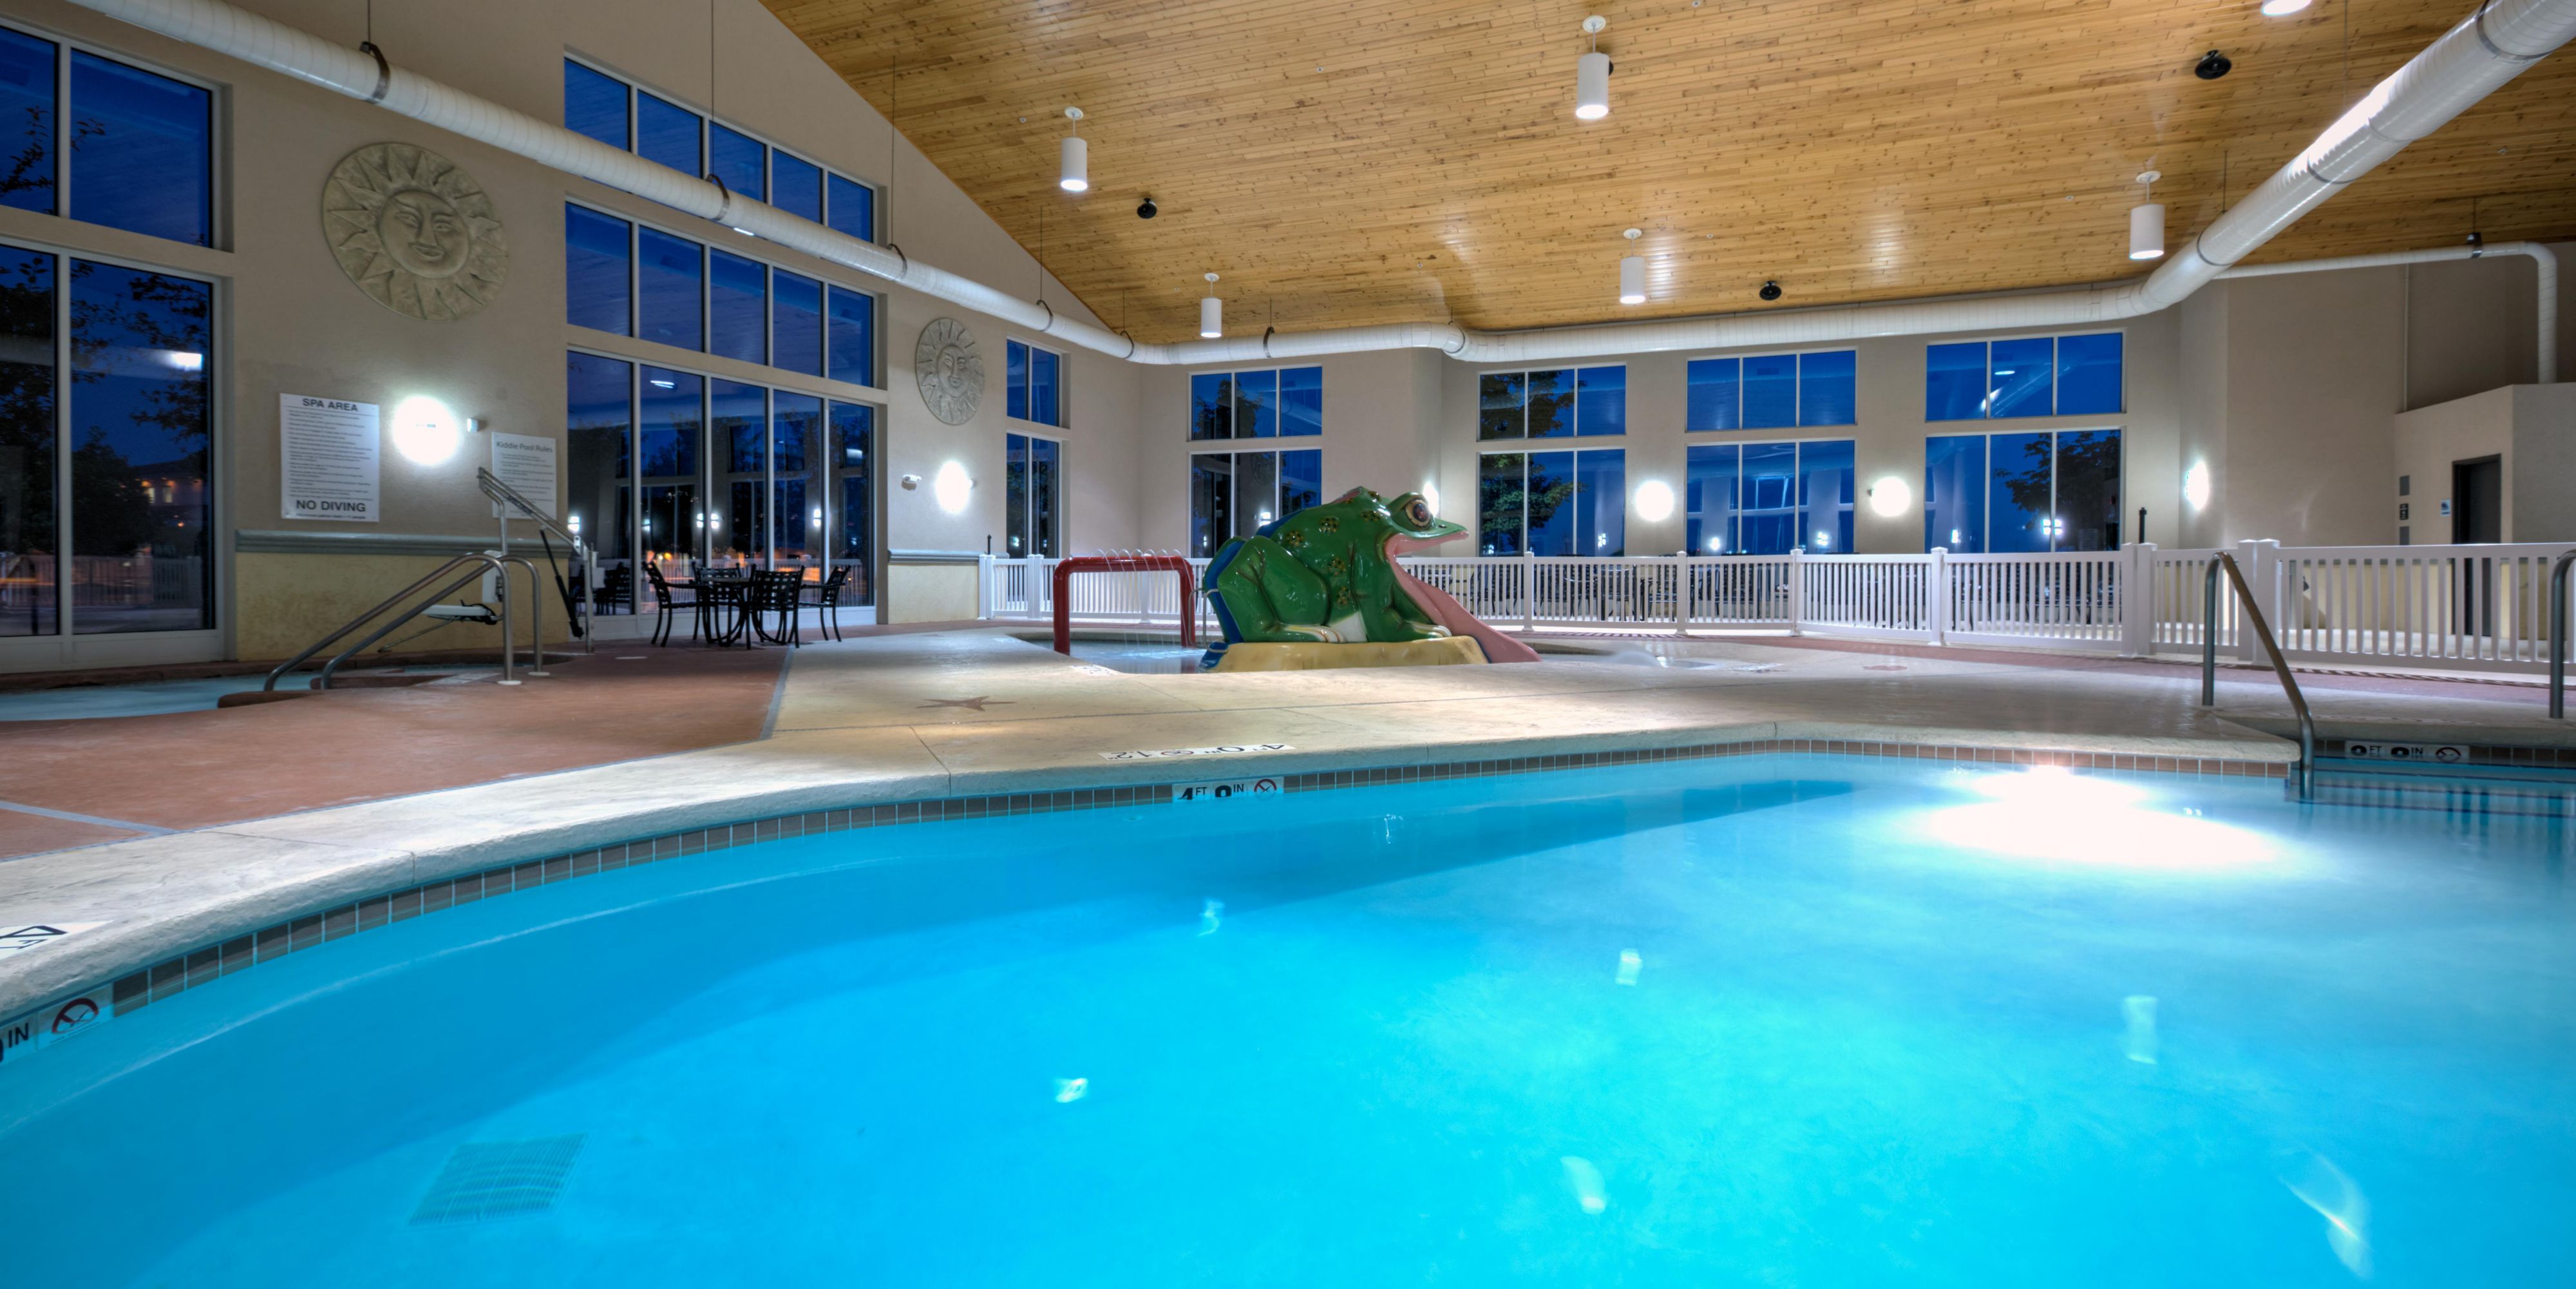 Our hotel is perfect for family's looking to get away for the night.  Our indoor pool with hot tub also features a children's pool and frog slide for small children.  